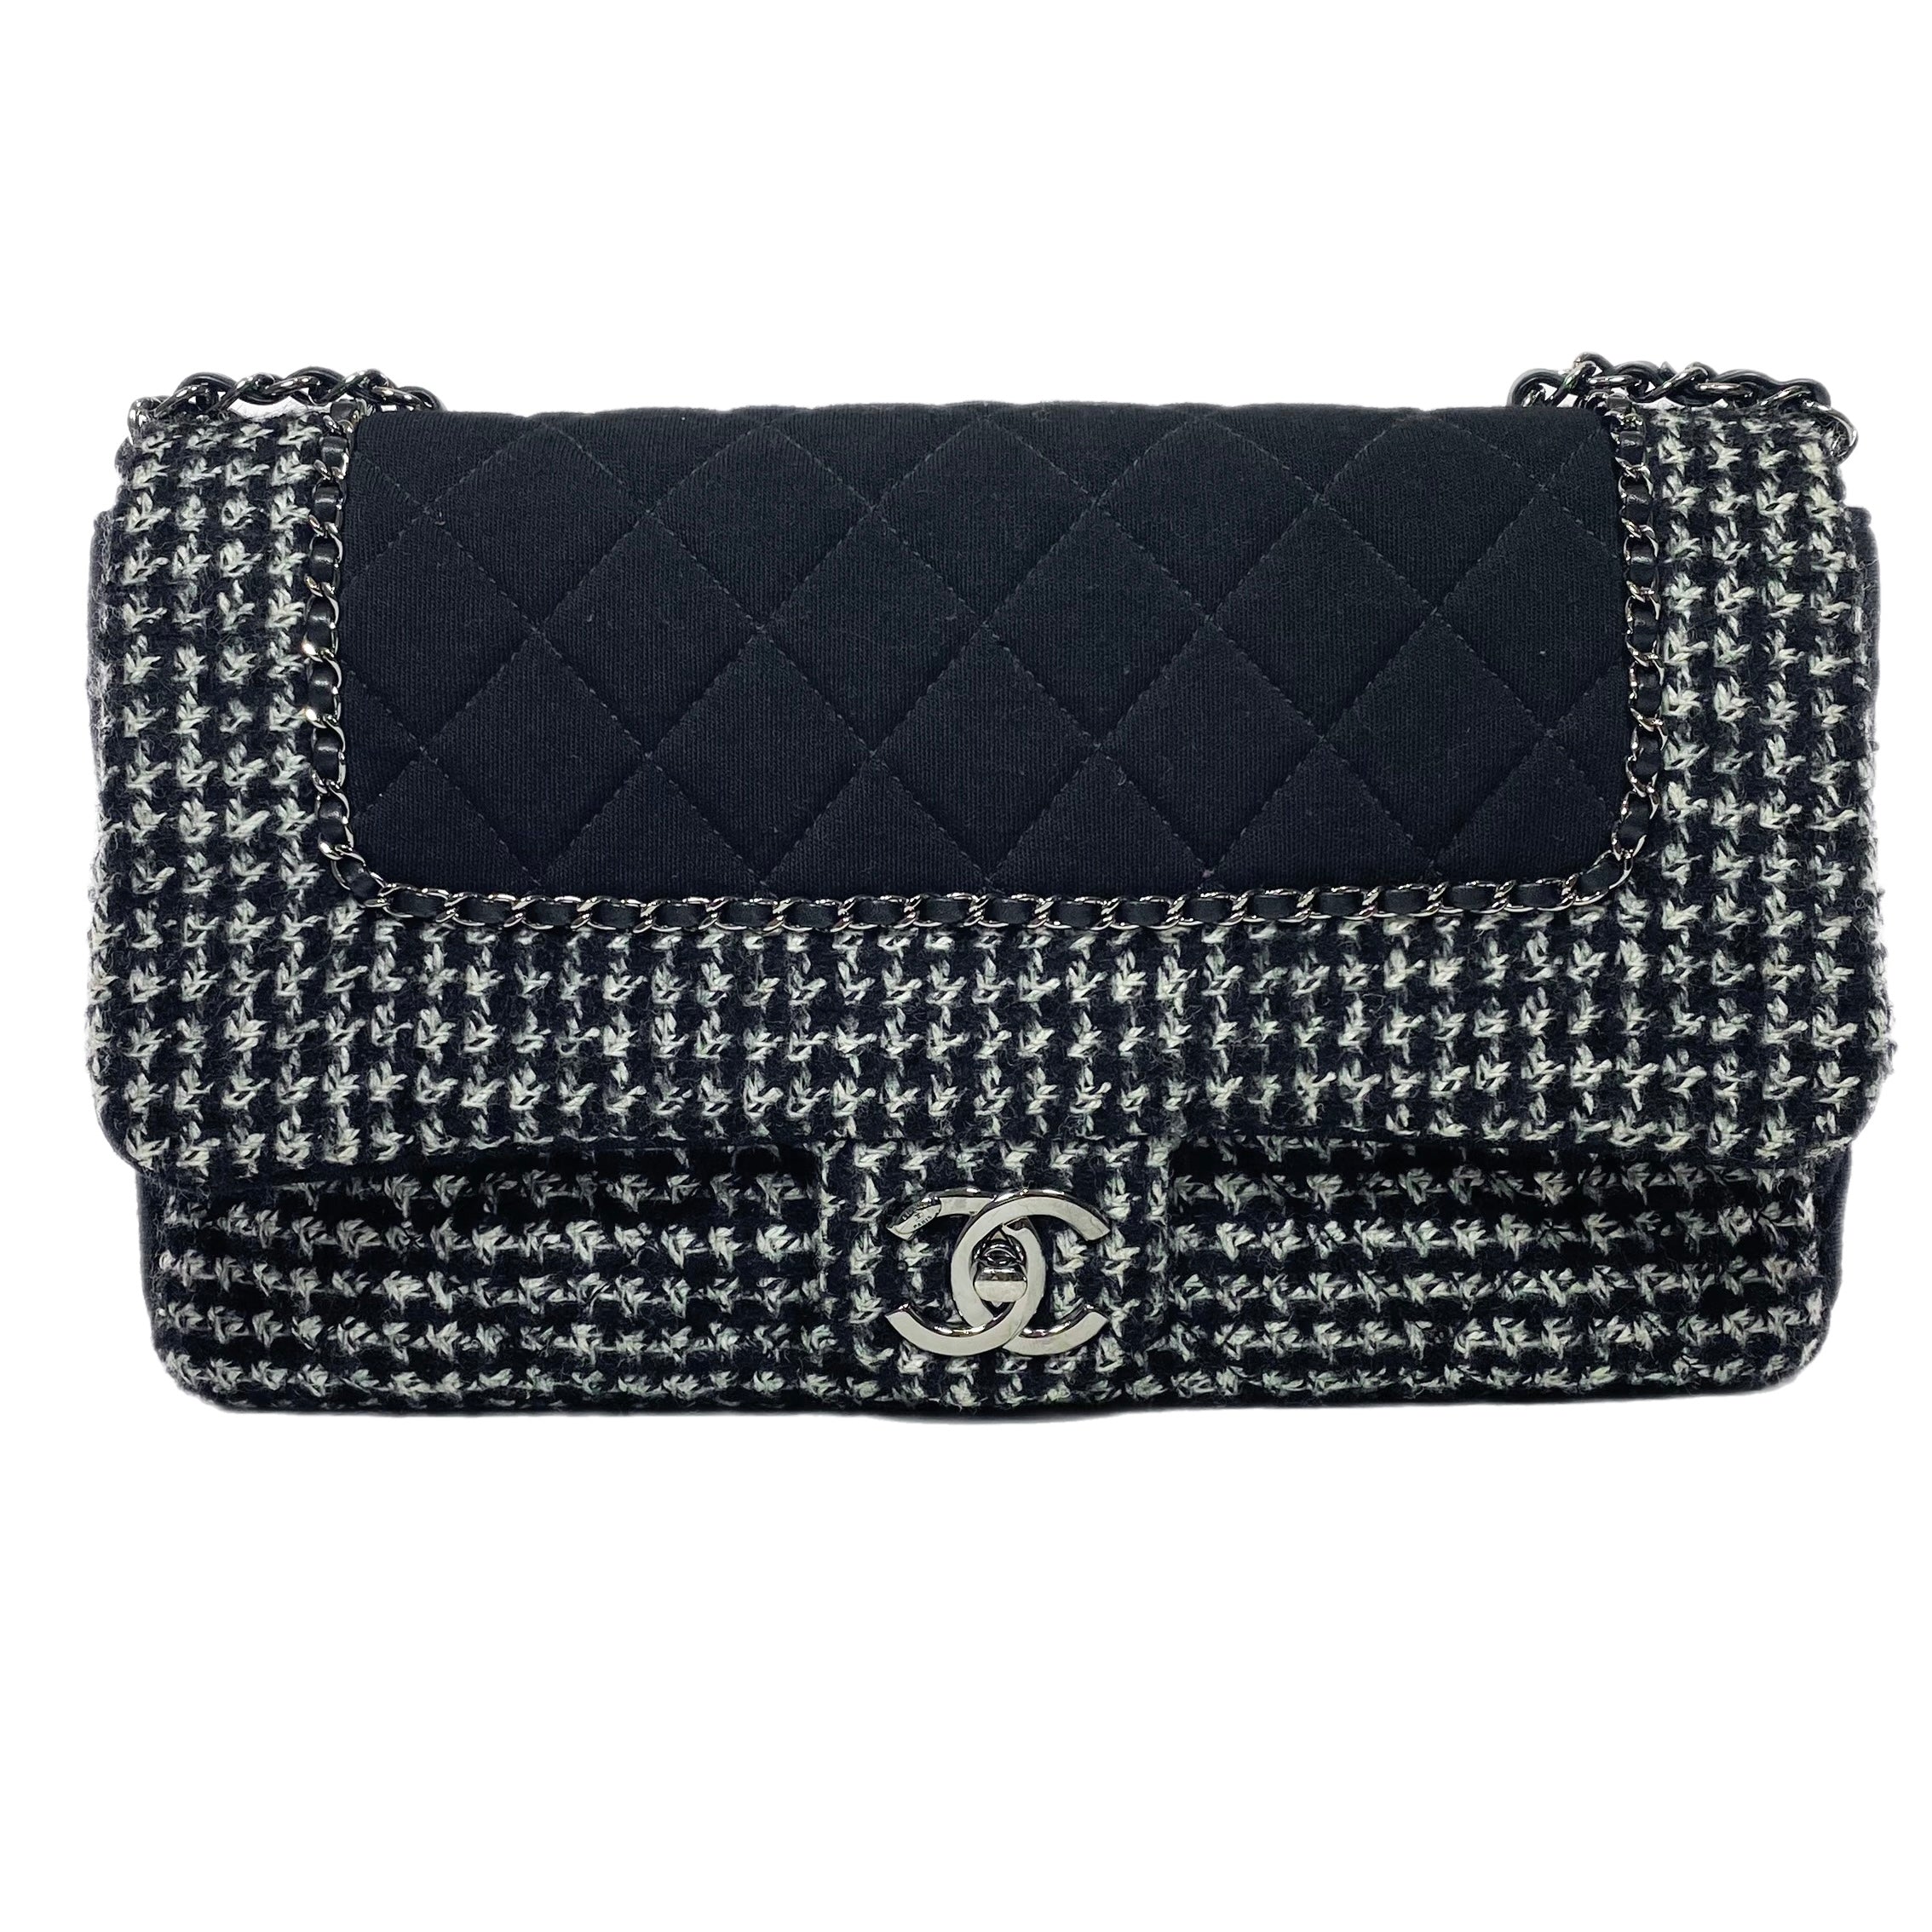 Chanel Quilted Tweed Flap Bag